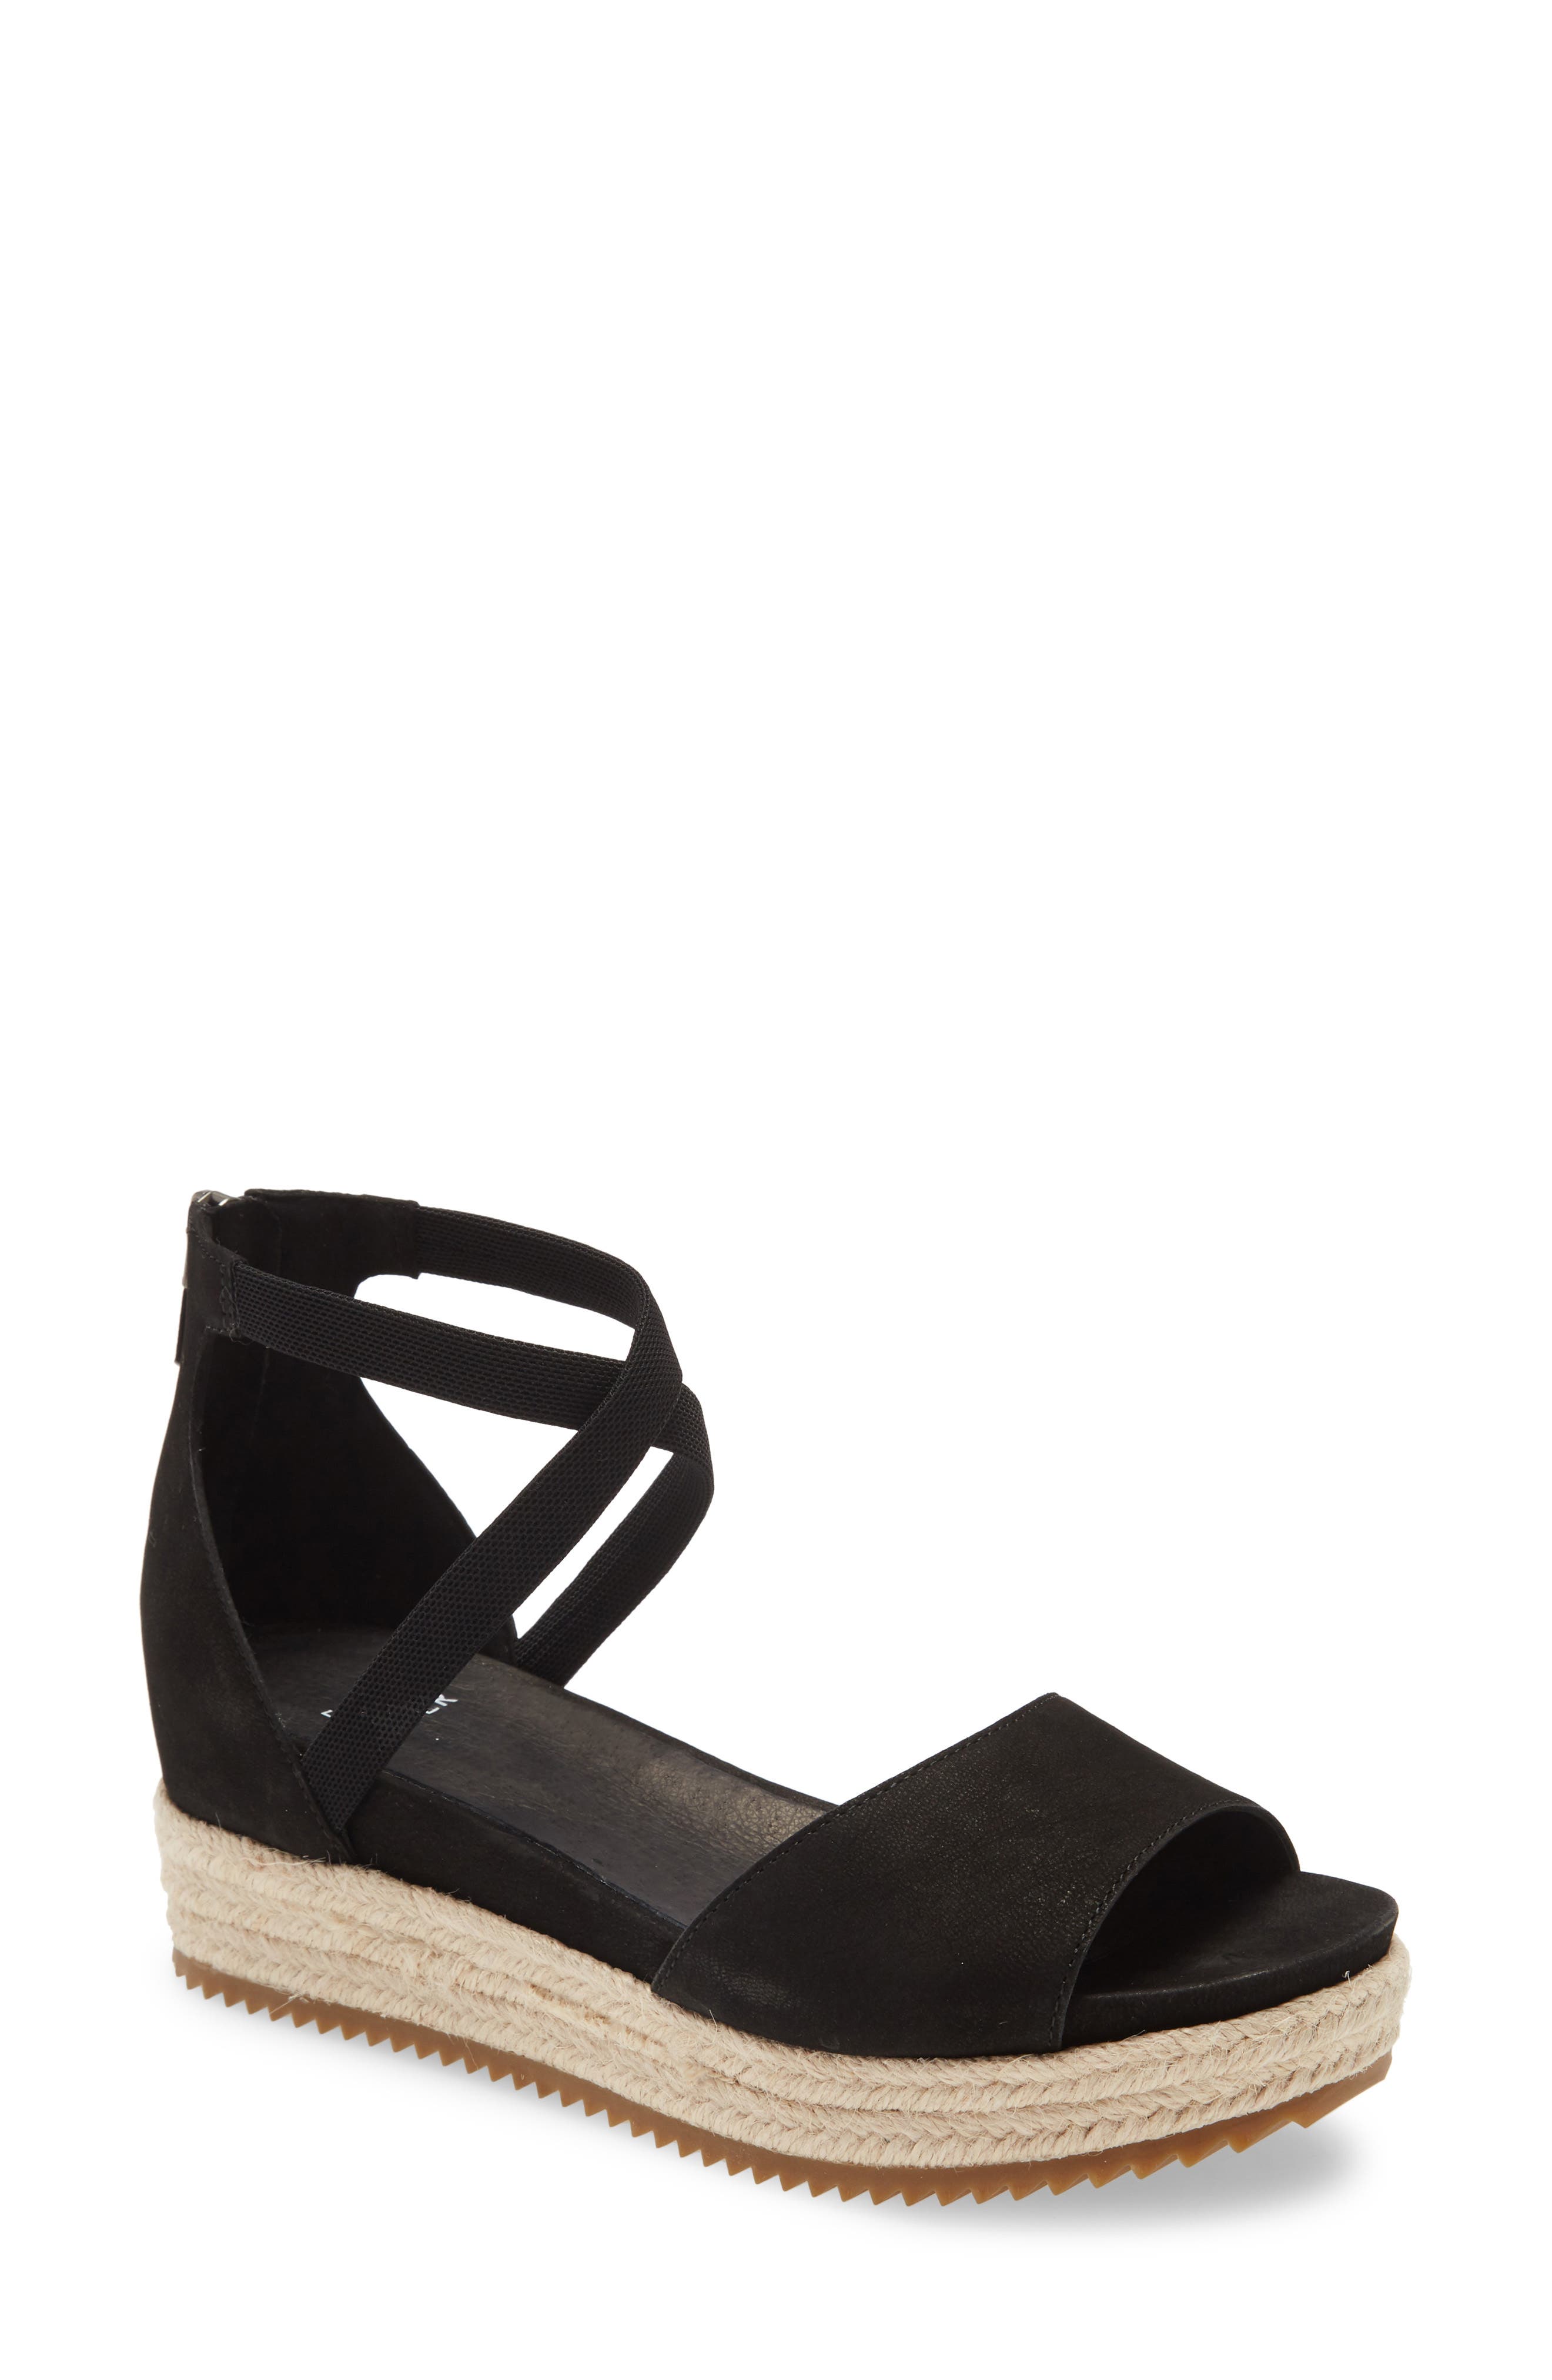 nordstrom womens shoes eileen fisher